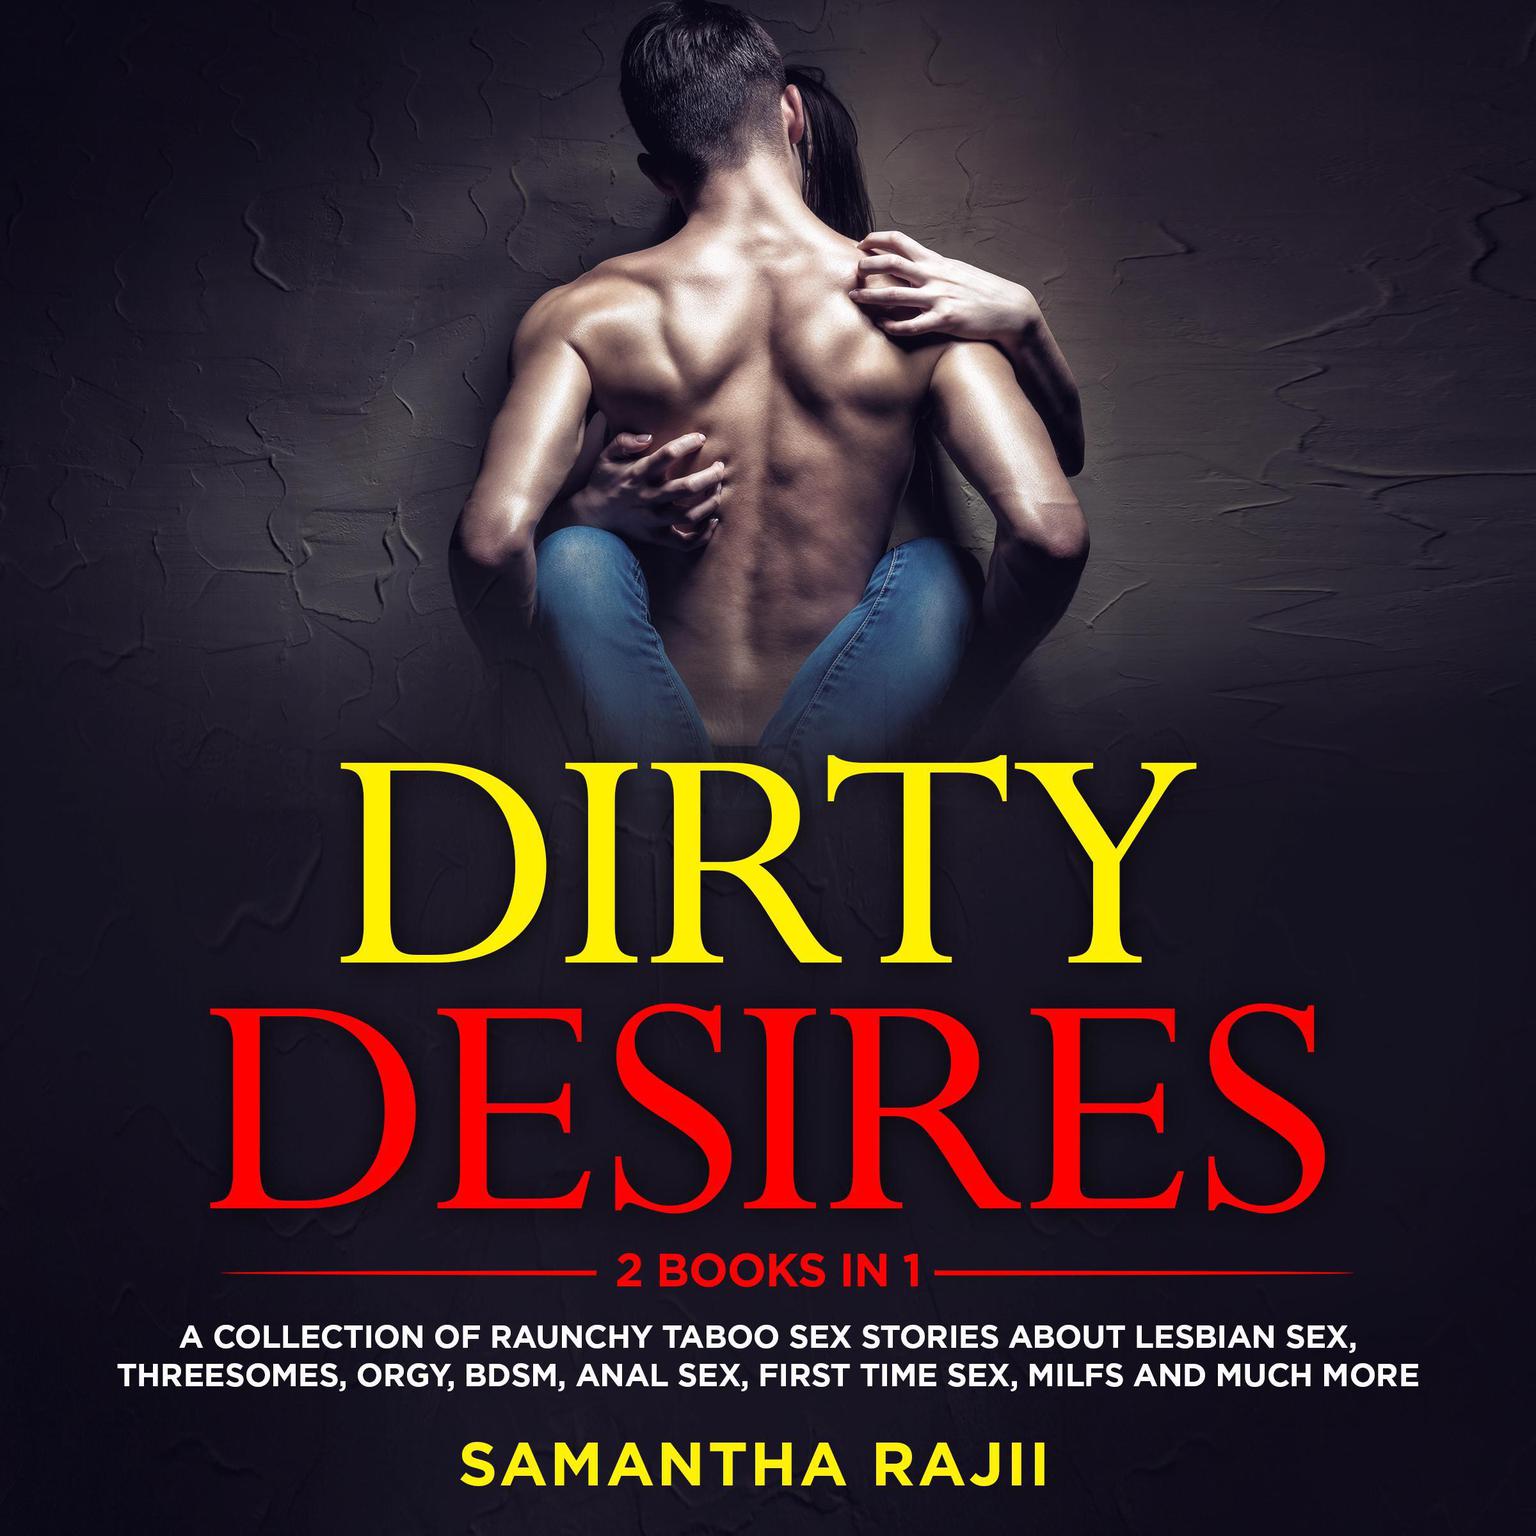 Dirty Desires: A Collection Of Raunchy Taboo Sex Stories About Lesbian Sex, Threesomes, Orgy, BDSM, Anal Sex, First Time Sex, MILFs and Much More (2 Books in 1) Audiobook, by Samantha Rajii